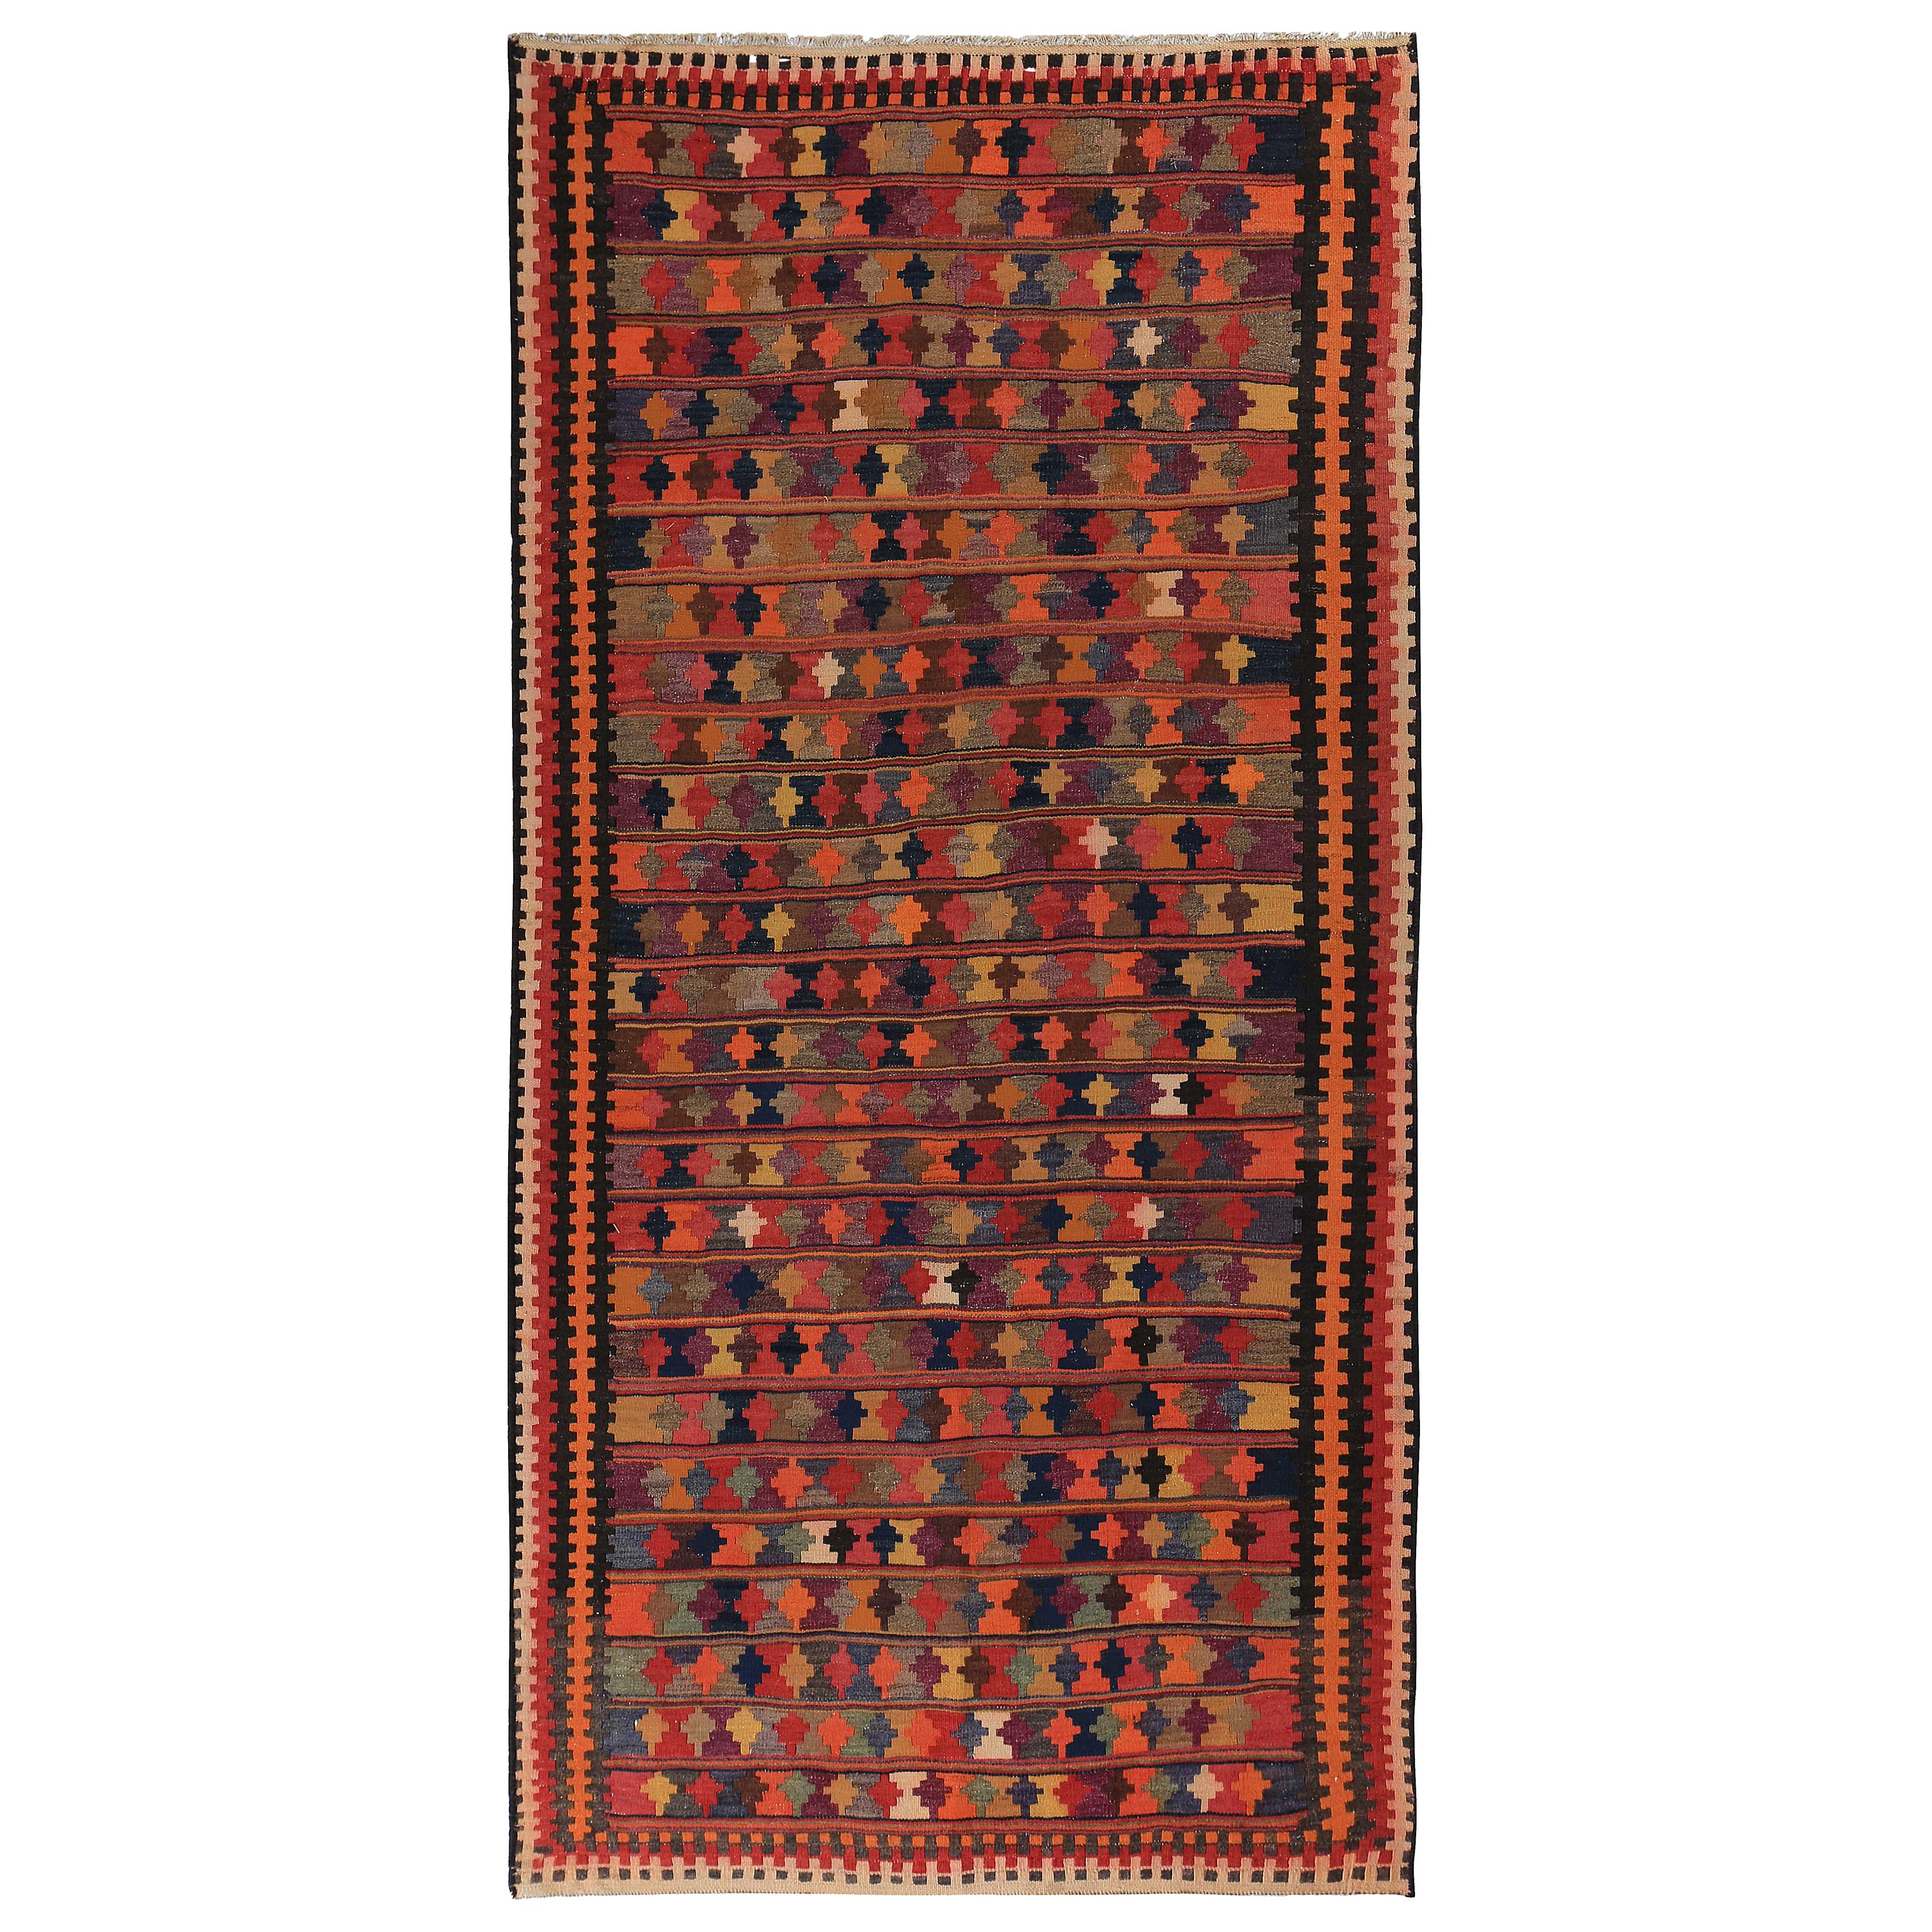 New Turkish Kilim Rug with Colorful Geometric and Tribal Details